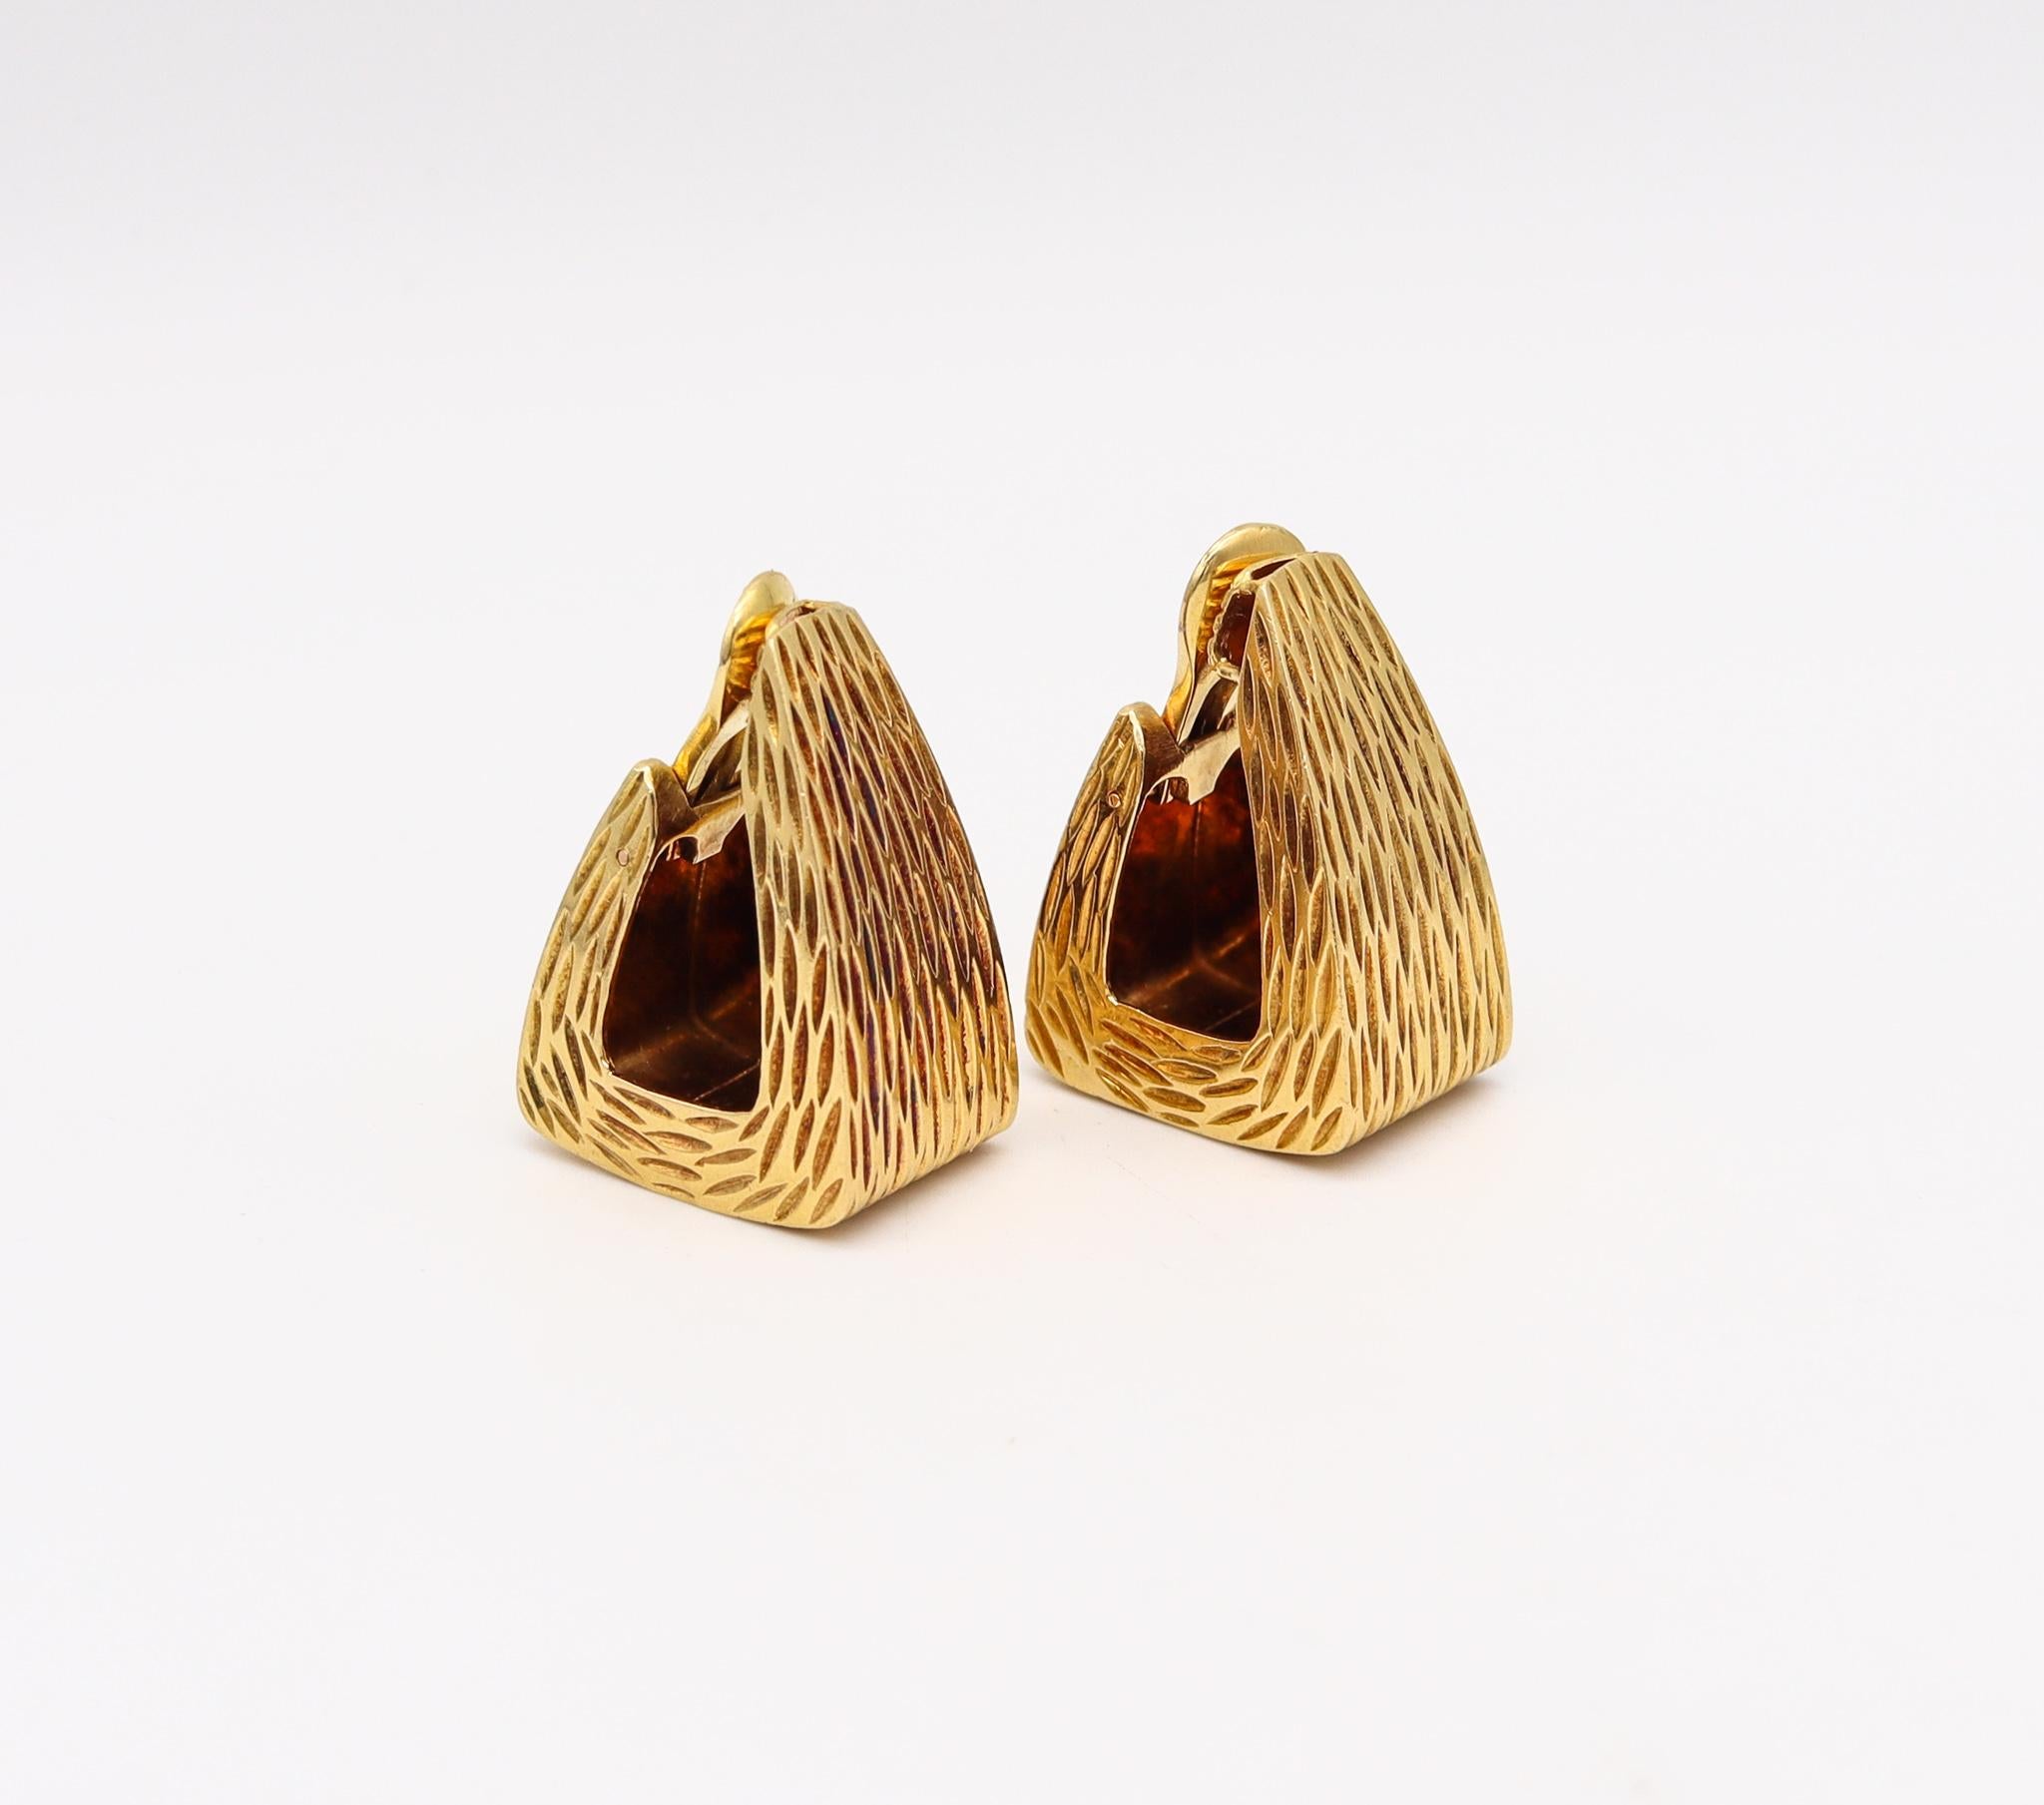 Statement earrings designed by Robert Wander.

Beautiful bold pair created at the atelier of Robert Wander for Wander France, back in the 1960's. These gorgeous earrings were crafted with sharp geometric patterns in solid yellow gold of 18 karats